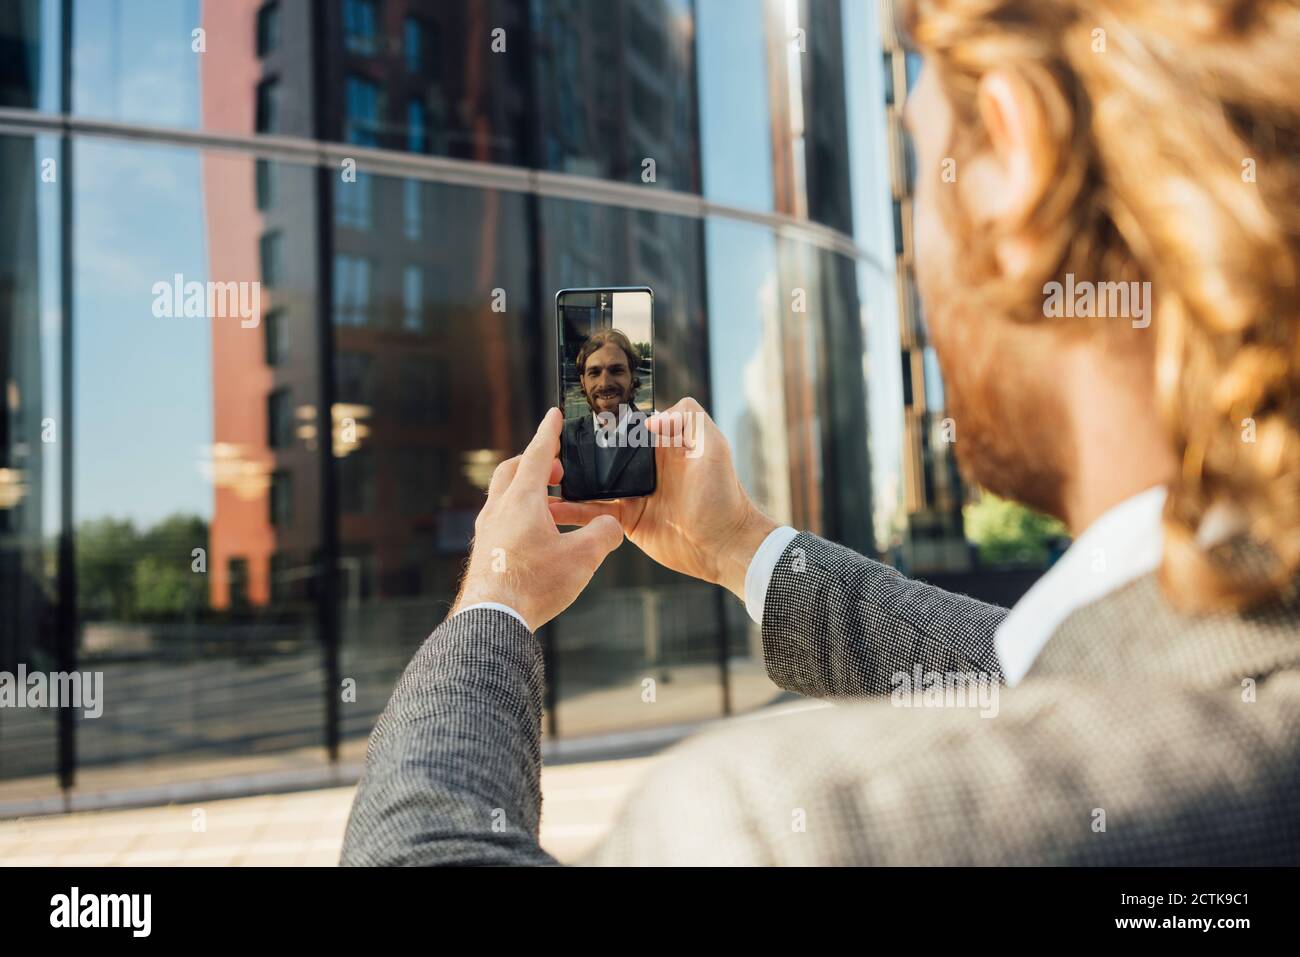 Young businessman taking selfie at downtown district Stock Photo